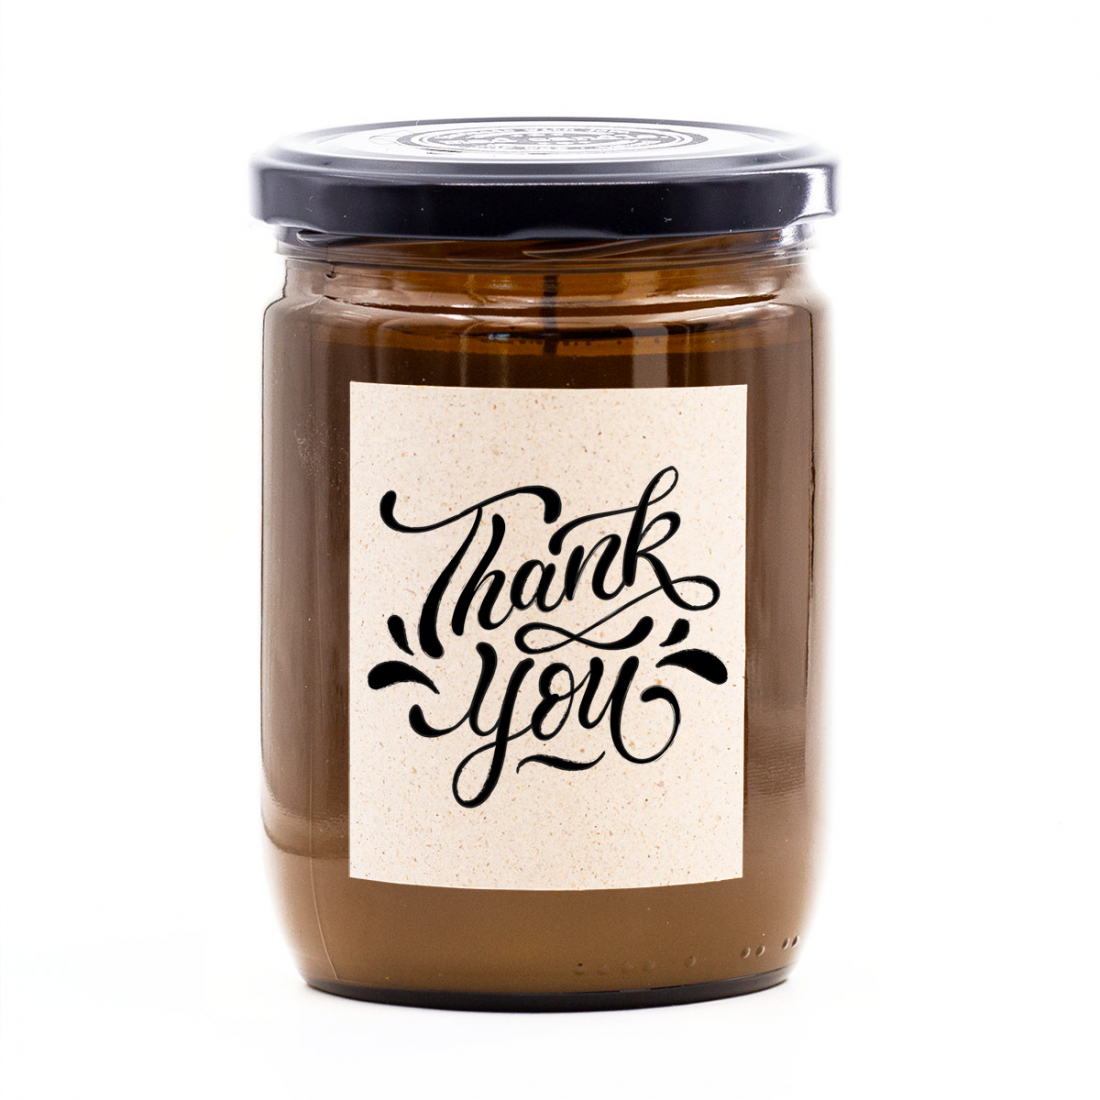 'Thank You' Scented Candle - 360 g